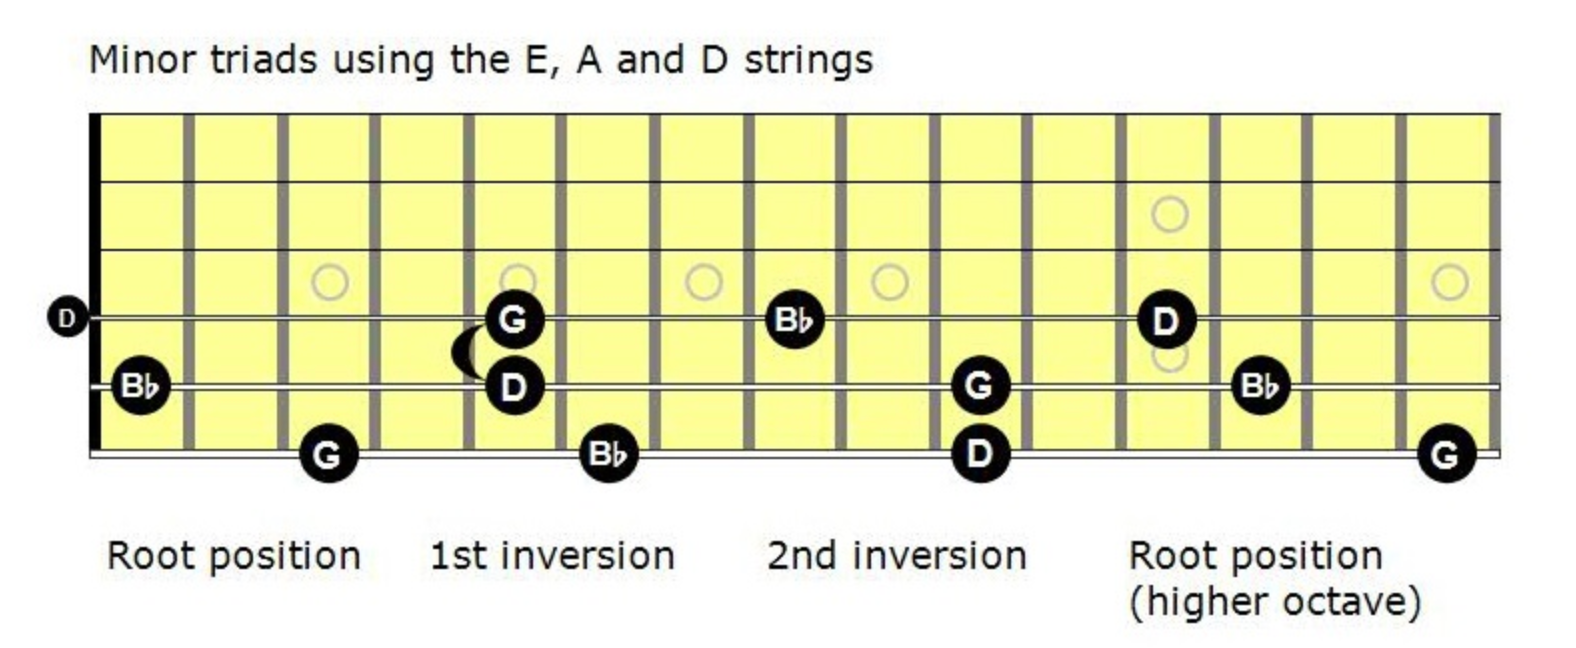 Minor Triad: all inversions on E, A, and D strings